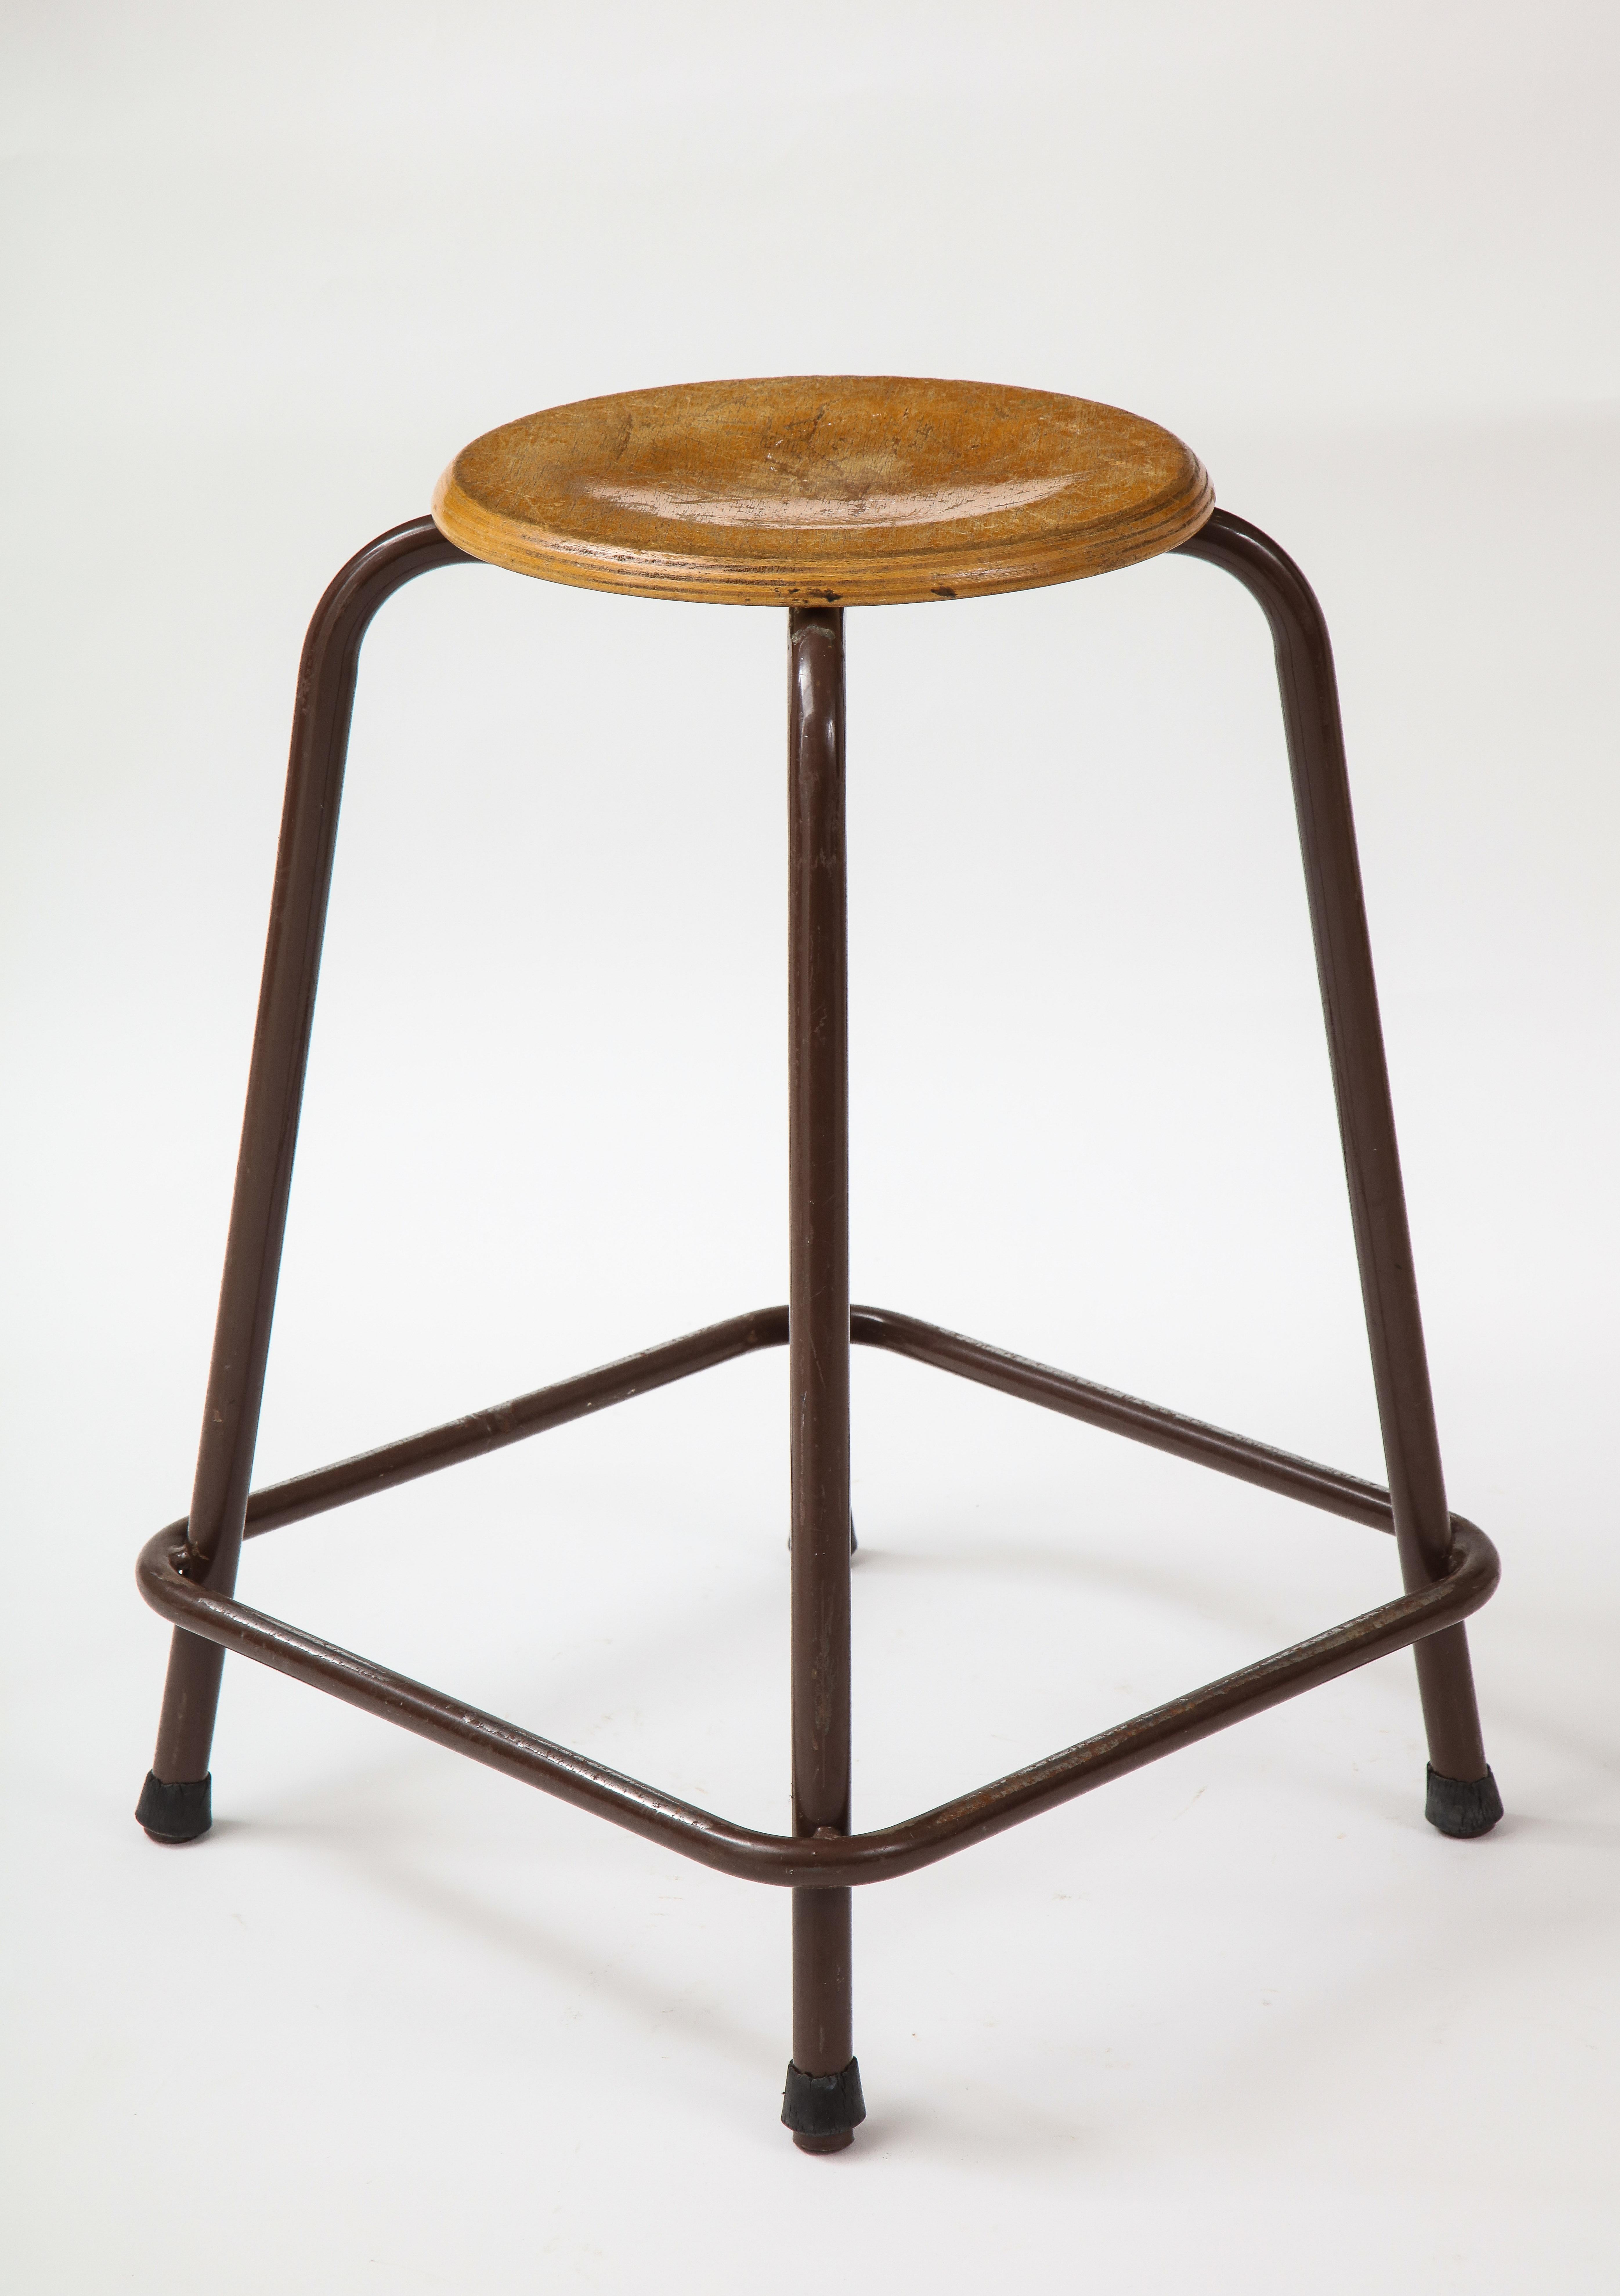 Mid-20th Century French Stool with a Wood Seat & Metal Base, c. 1950